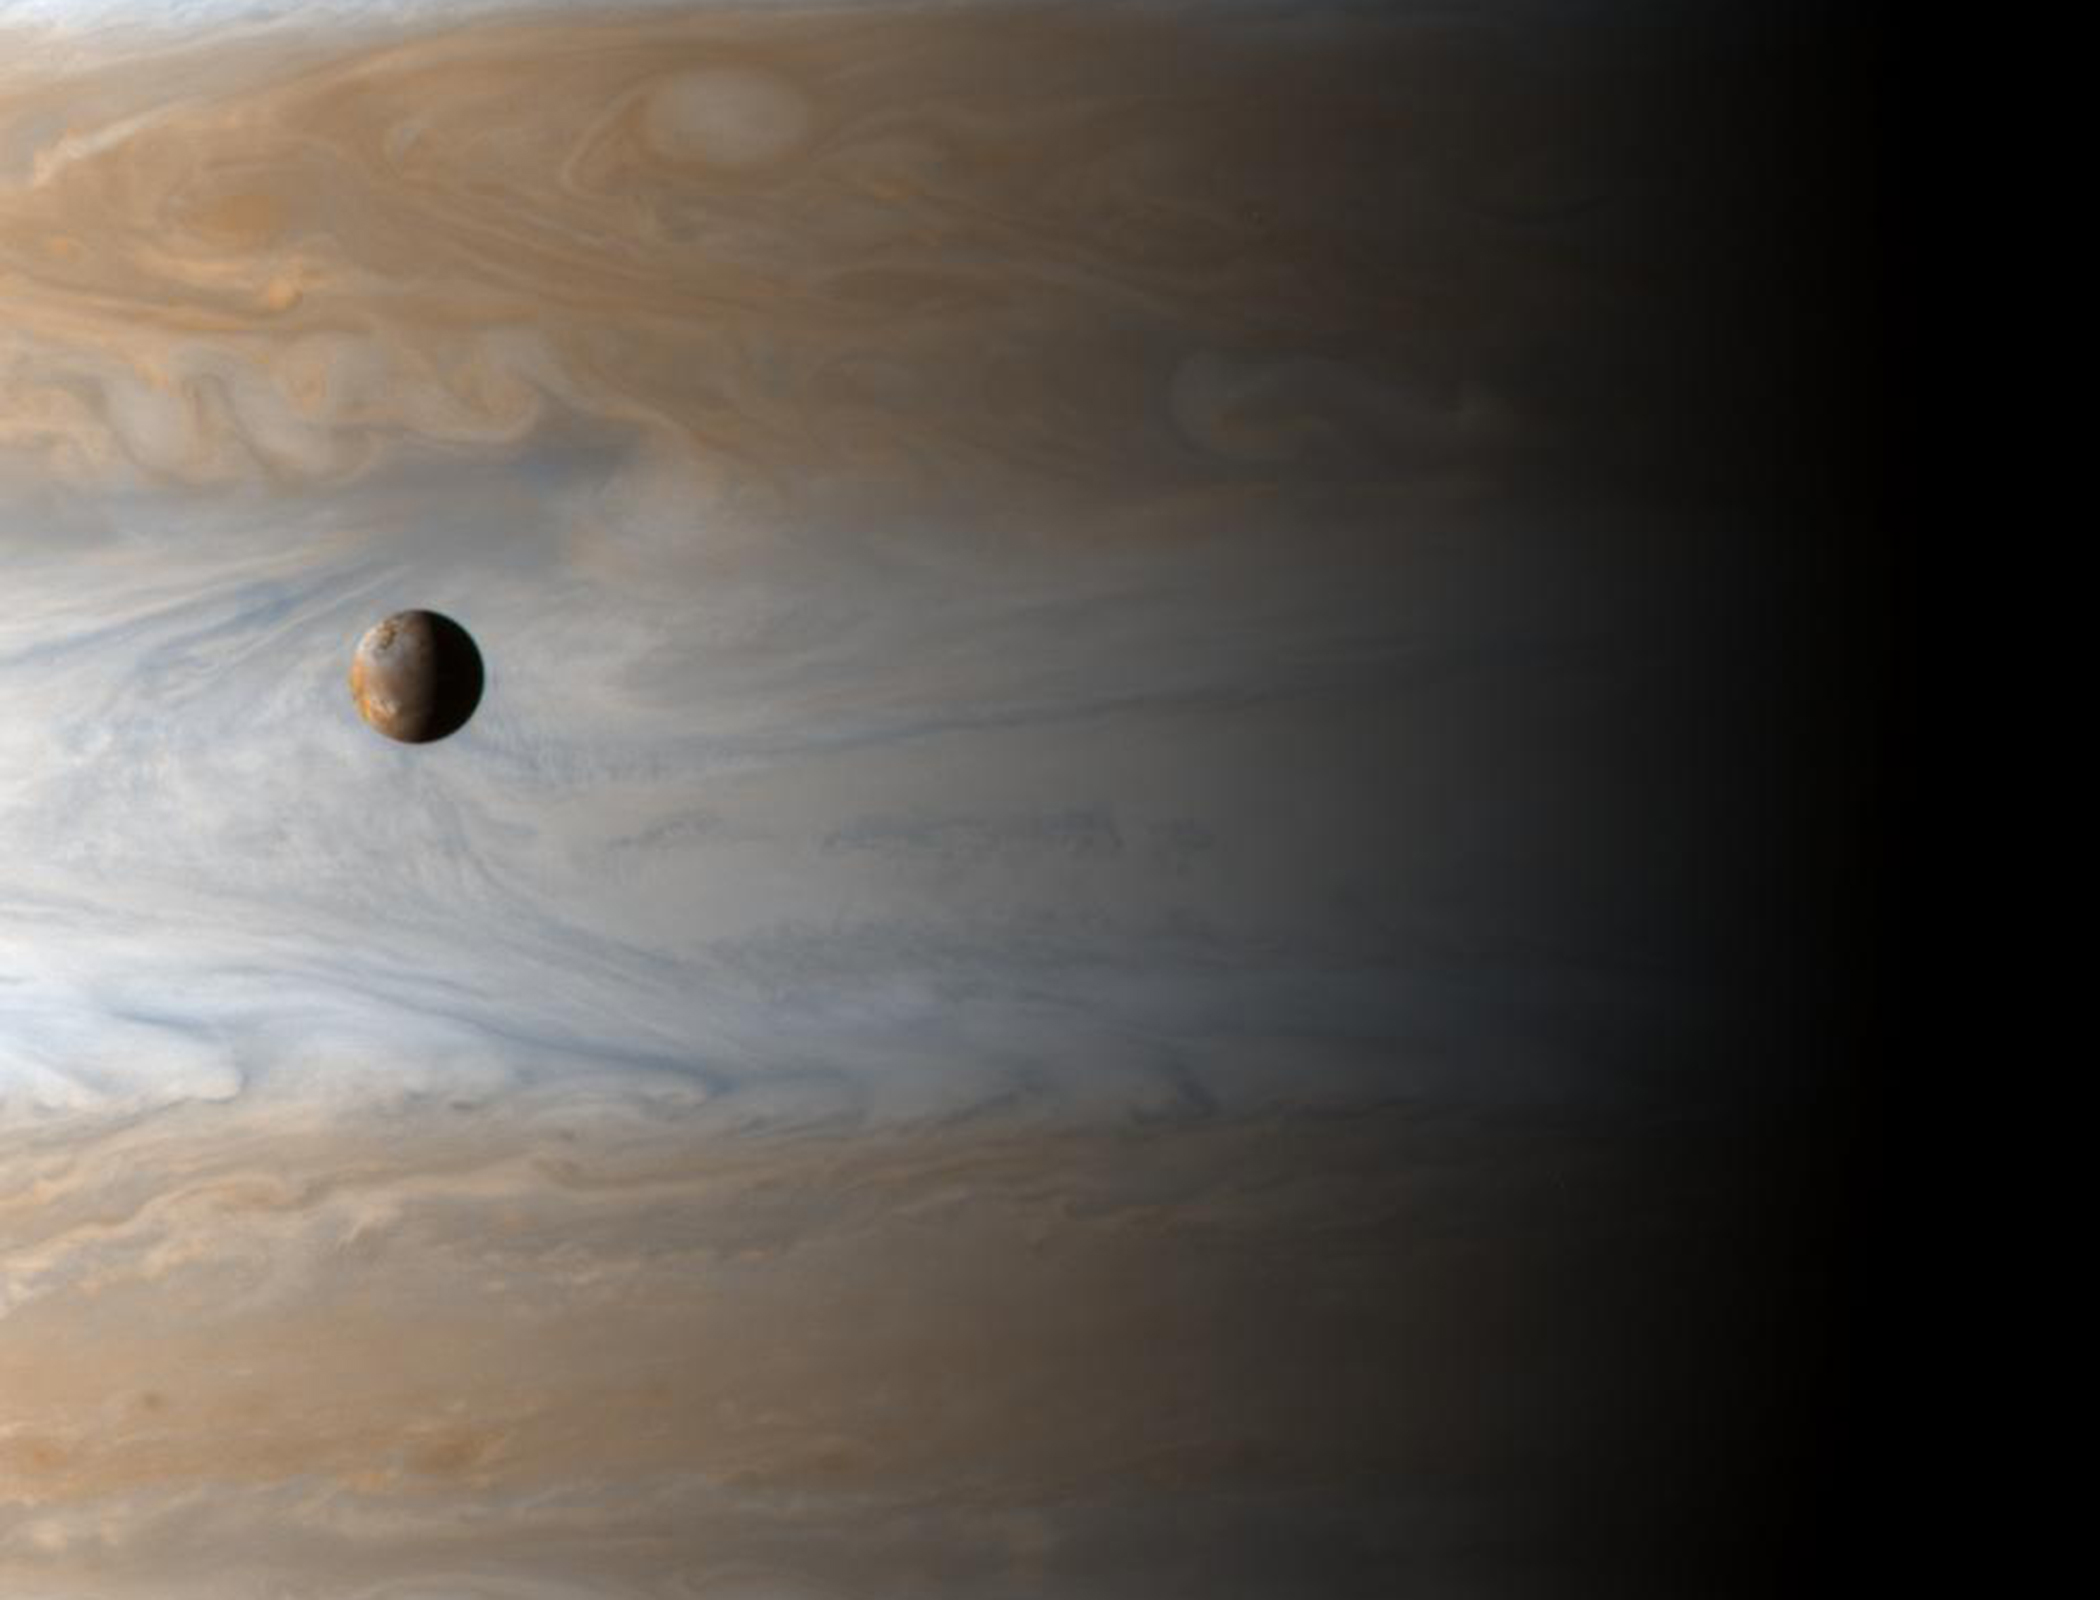 Hubble and James Webb telescopes team up to study Jupiter’s volcanic moon